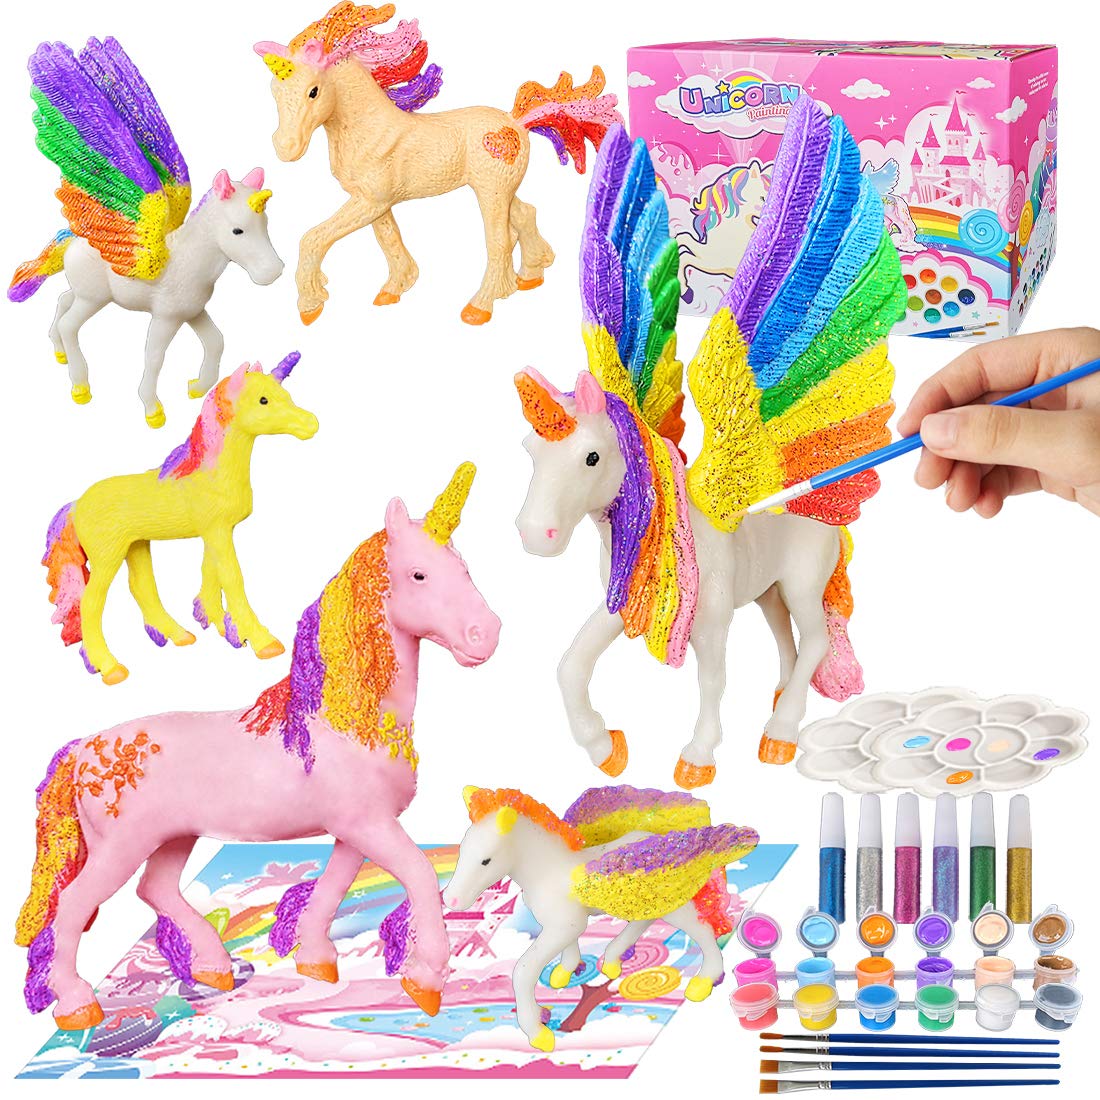 Yileqi Paint Your Own Unicorn Painting Kit, Unicorns Paint Craft for Girls Arts and Crafts for Kids Age 4 5 6 7 8 9 Years Old, Unicorn Party Favor Art Supplies DIY Kit Activities for Kid Birthday Gift